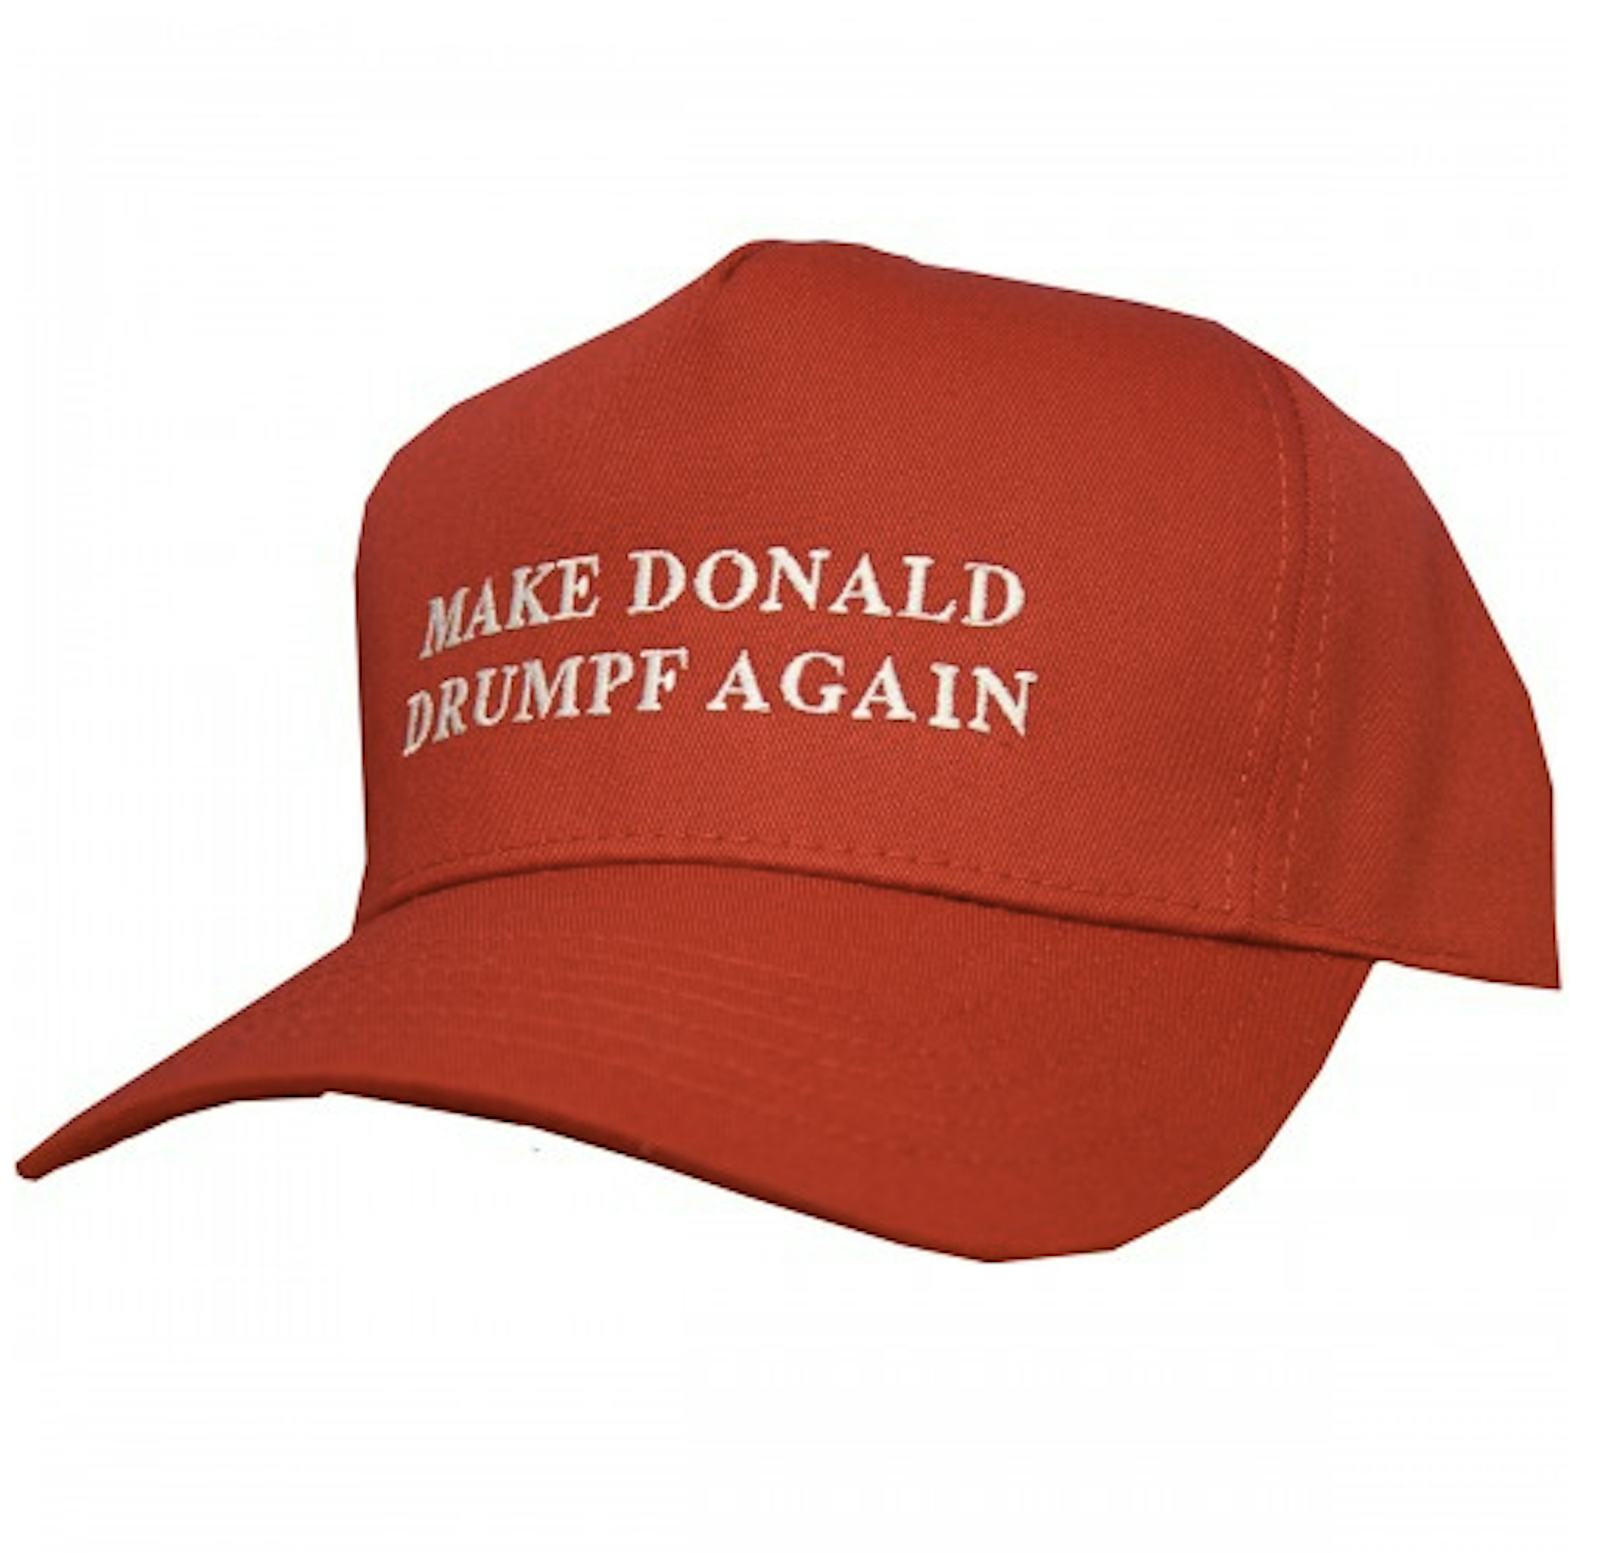 How To Get A Donald Drumpf Hat & Break The Spell Trump's Name Seems To Hold